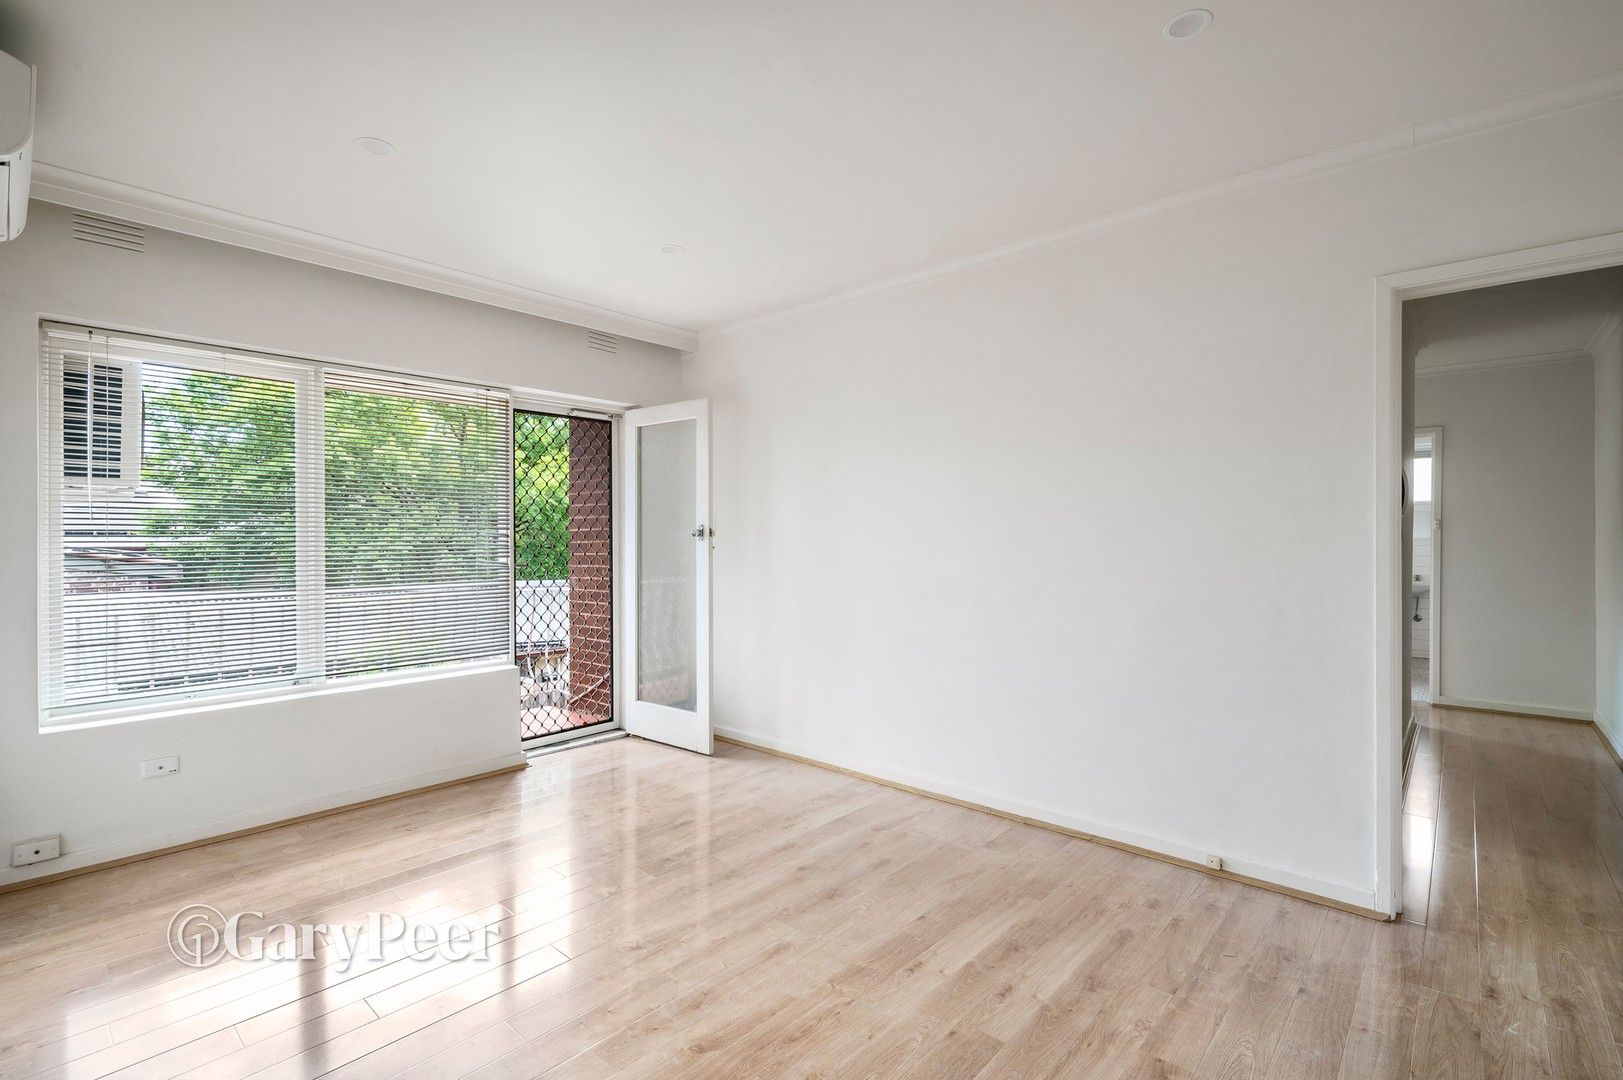 2 bedrooms Apartment / Unit / Flat in 5/16 Adelaide St MURRUMBEENA VIC, 3163